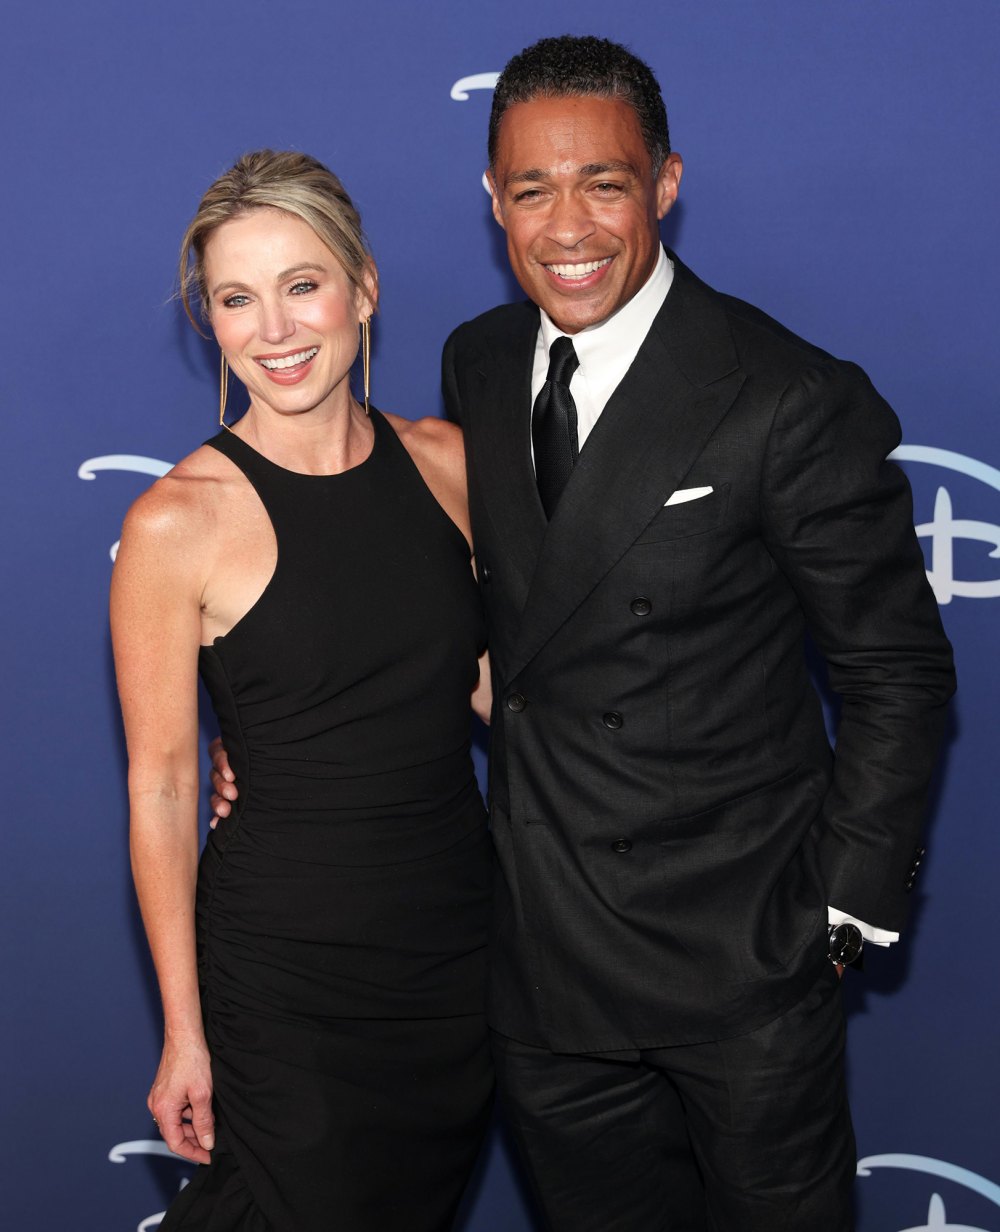 T.J. Holmes' Ex Marilee Fiebig Shows Support for Amy Robach's Daughter on Her Birthday After Drama: Details